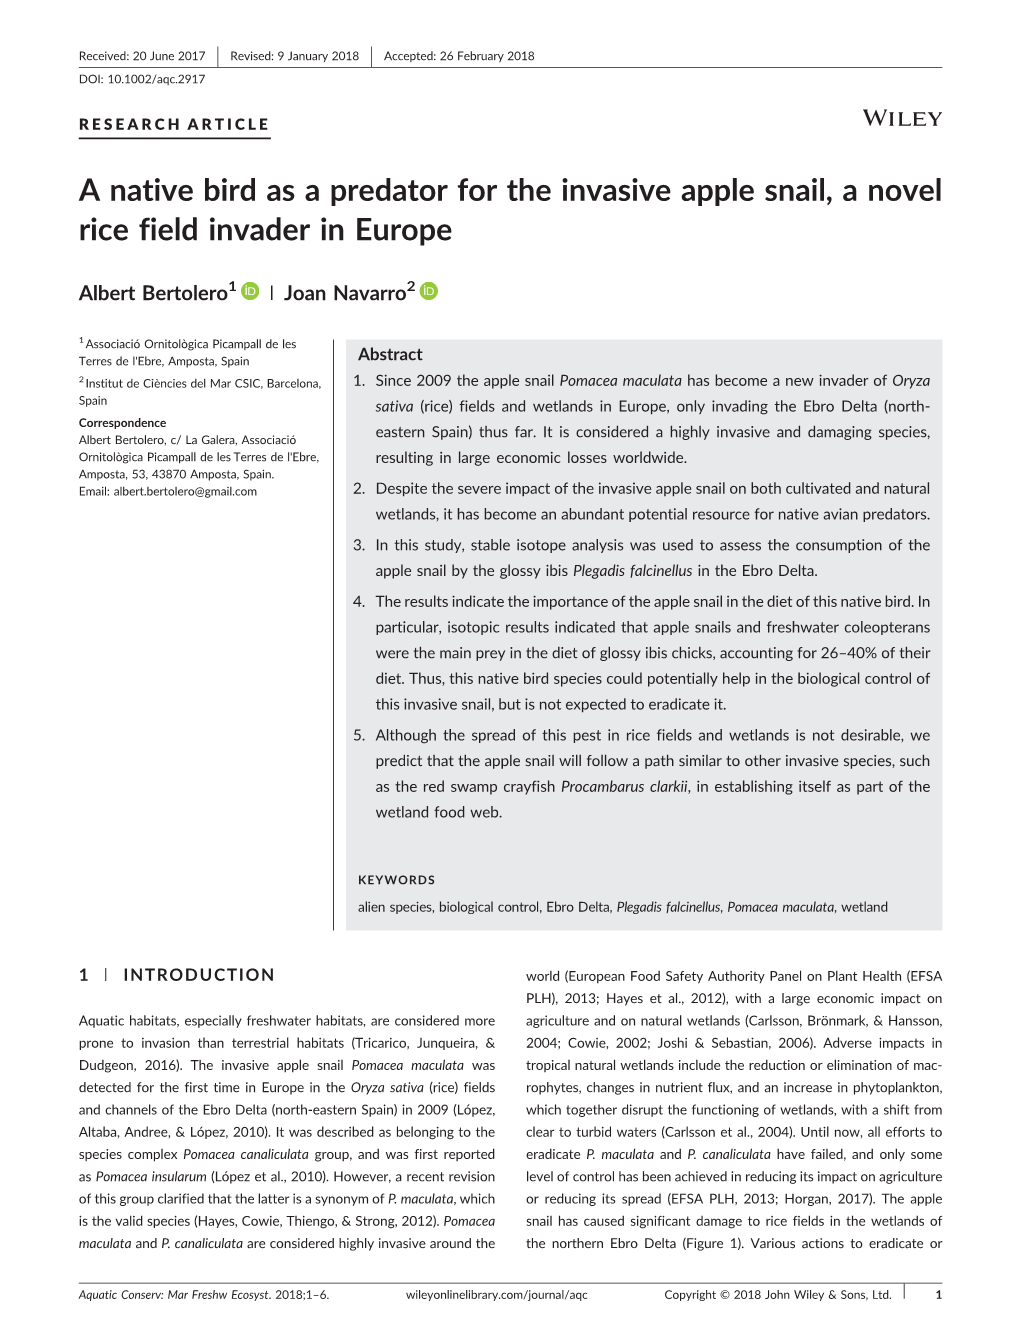 A Native Bird As a Predator for the Invasive Apple Snail, a Novel Rice Field Invader in Europe